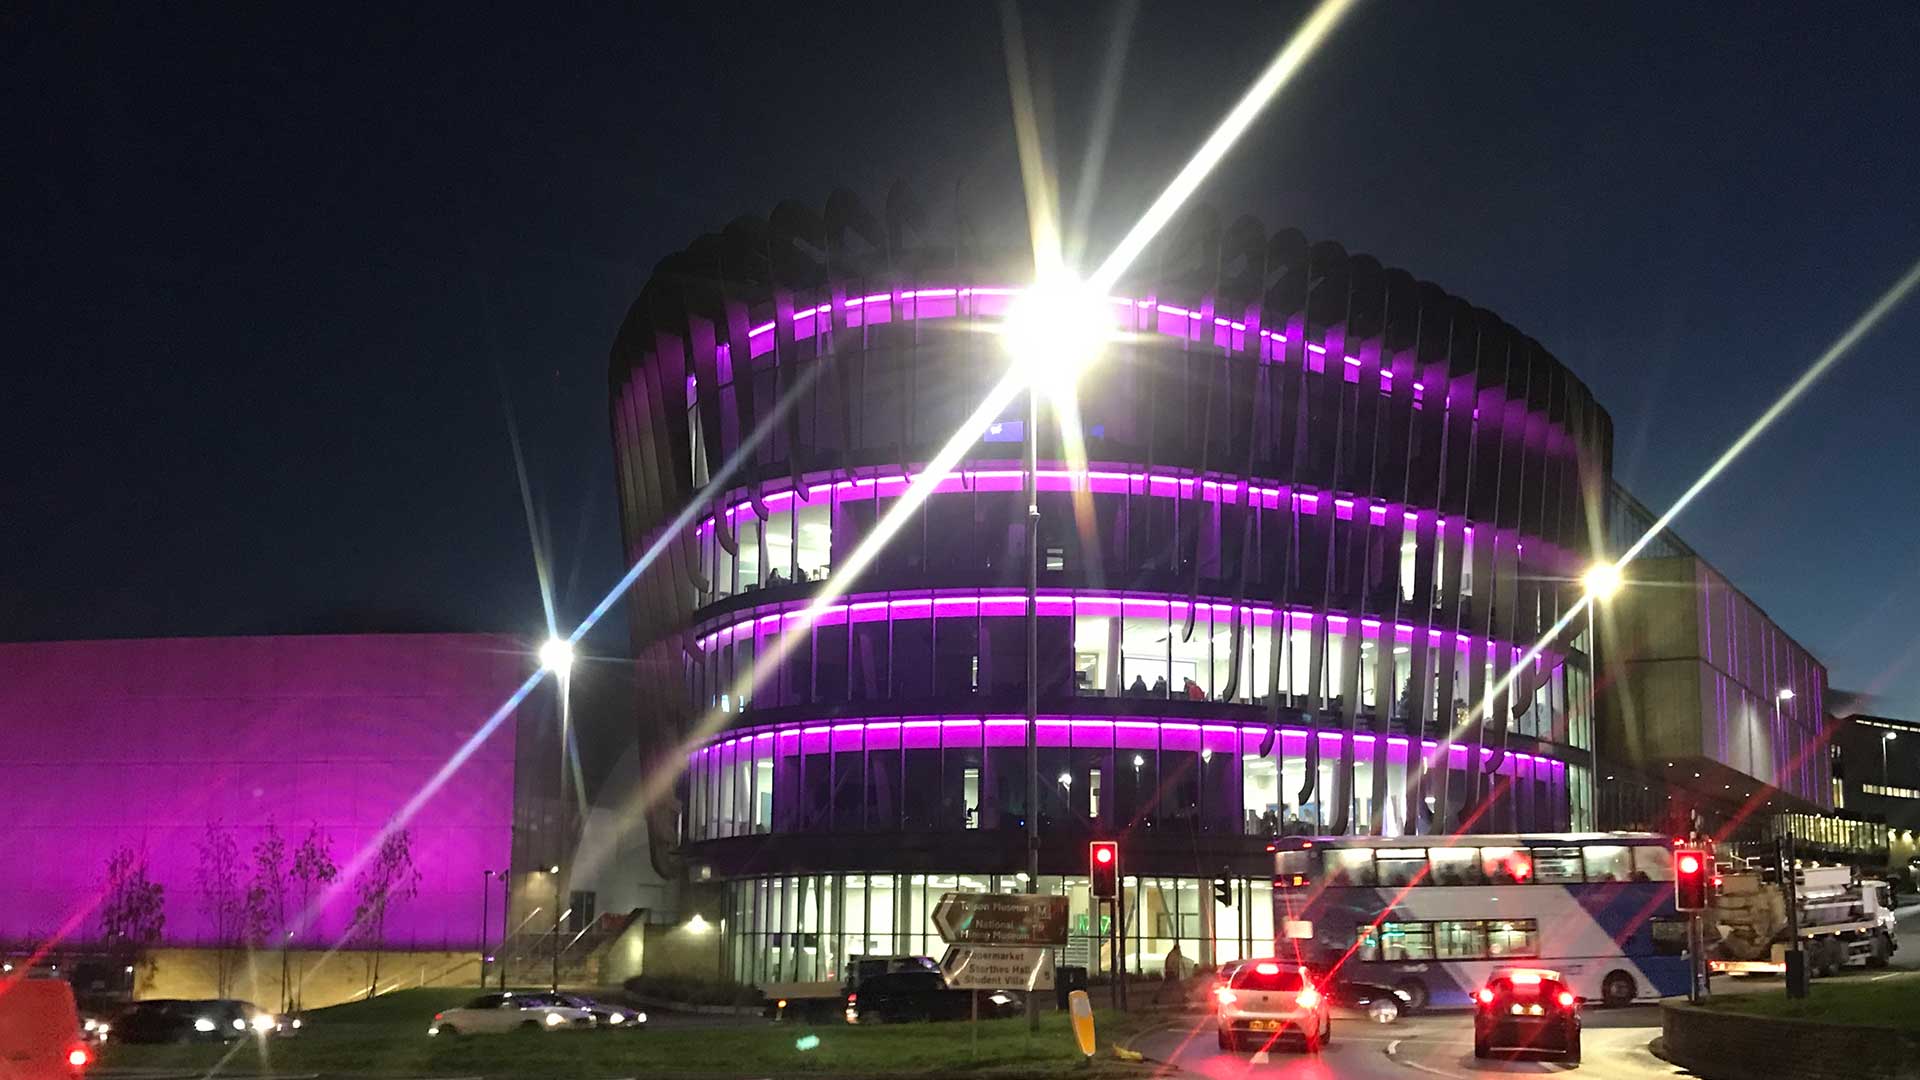 Oastler in purple lights for Disability Day taken from roundabout 